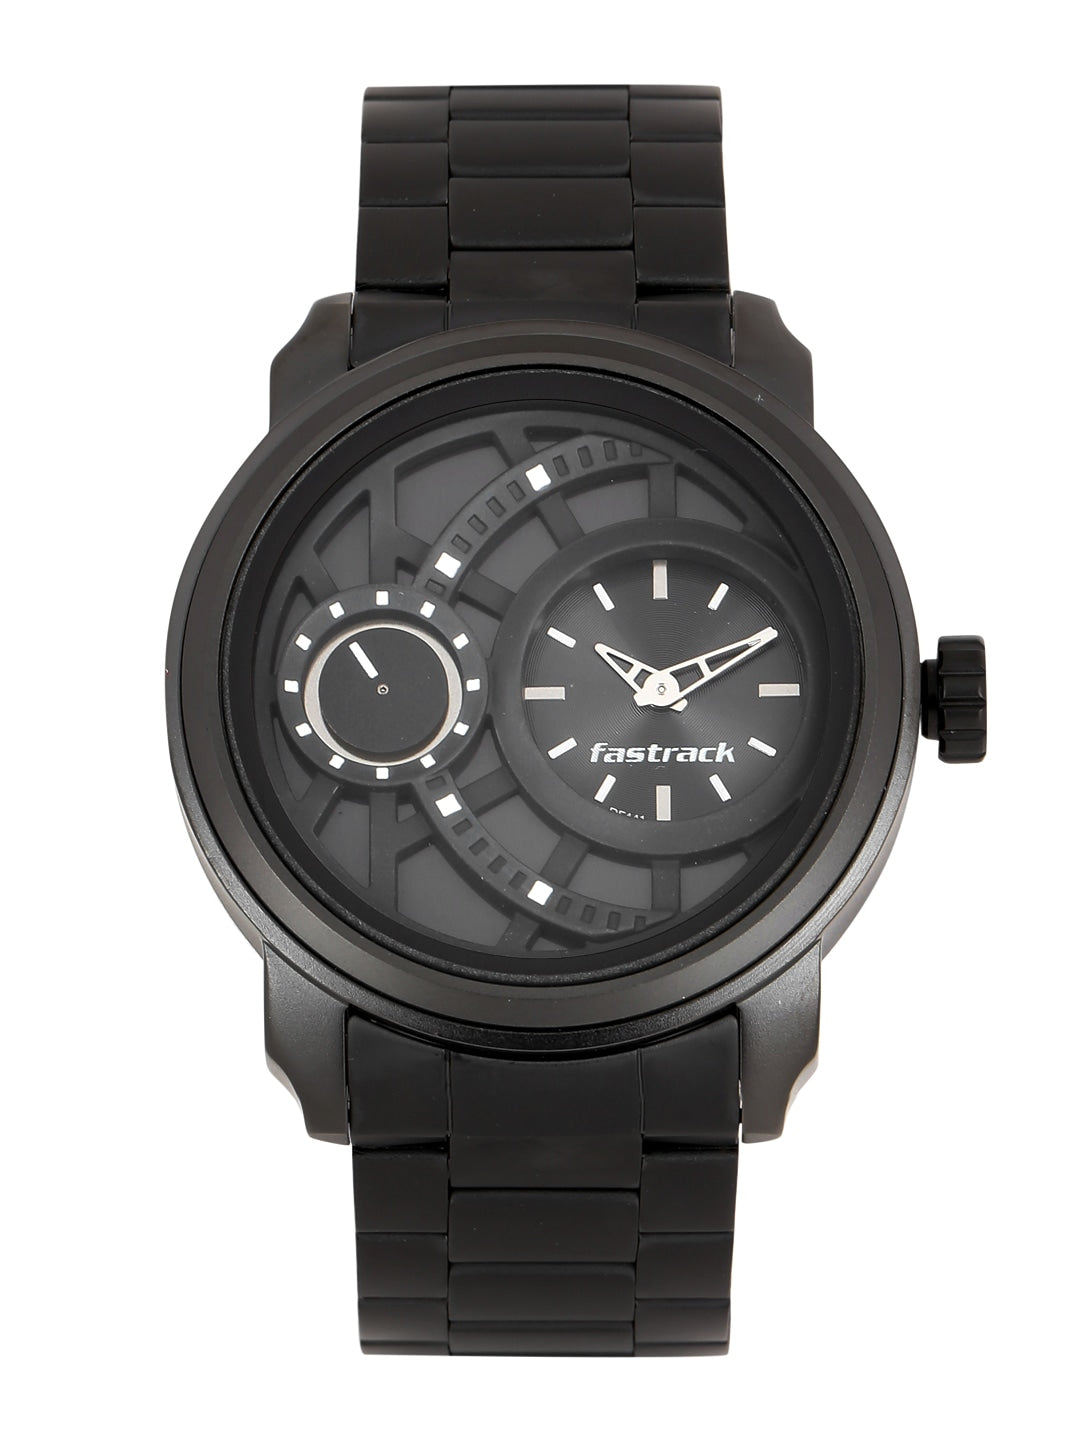 Fastrack Analog Black Men's Watch 3147KM01 | Stainless Steel | Mesh Strap | Water-Resistant | Minimal | Quartz Movement | Lifestyle | Business | Scratch-resistant | Fashionable | Halabh.com